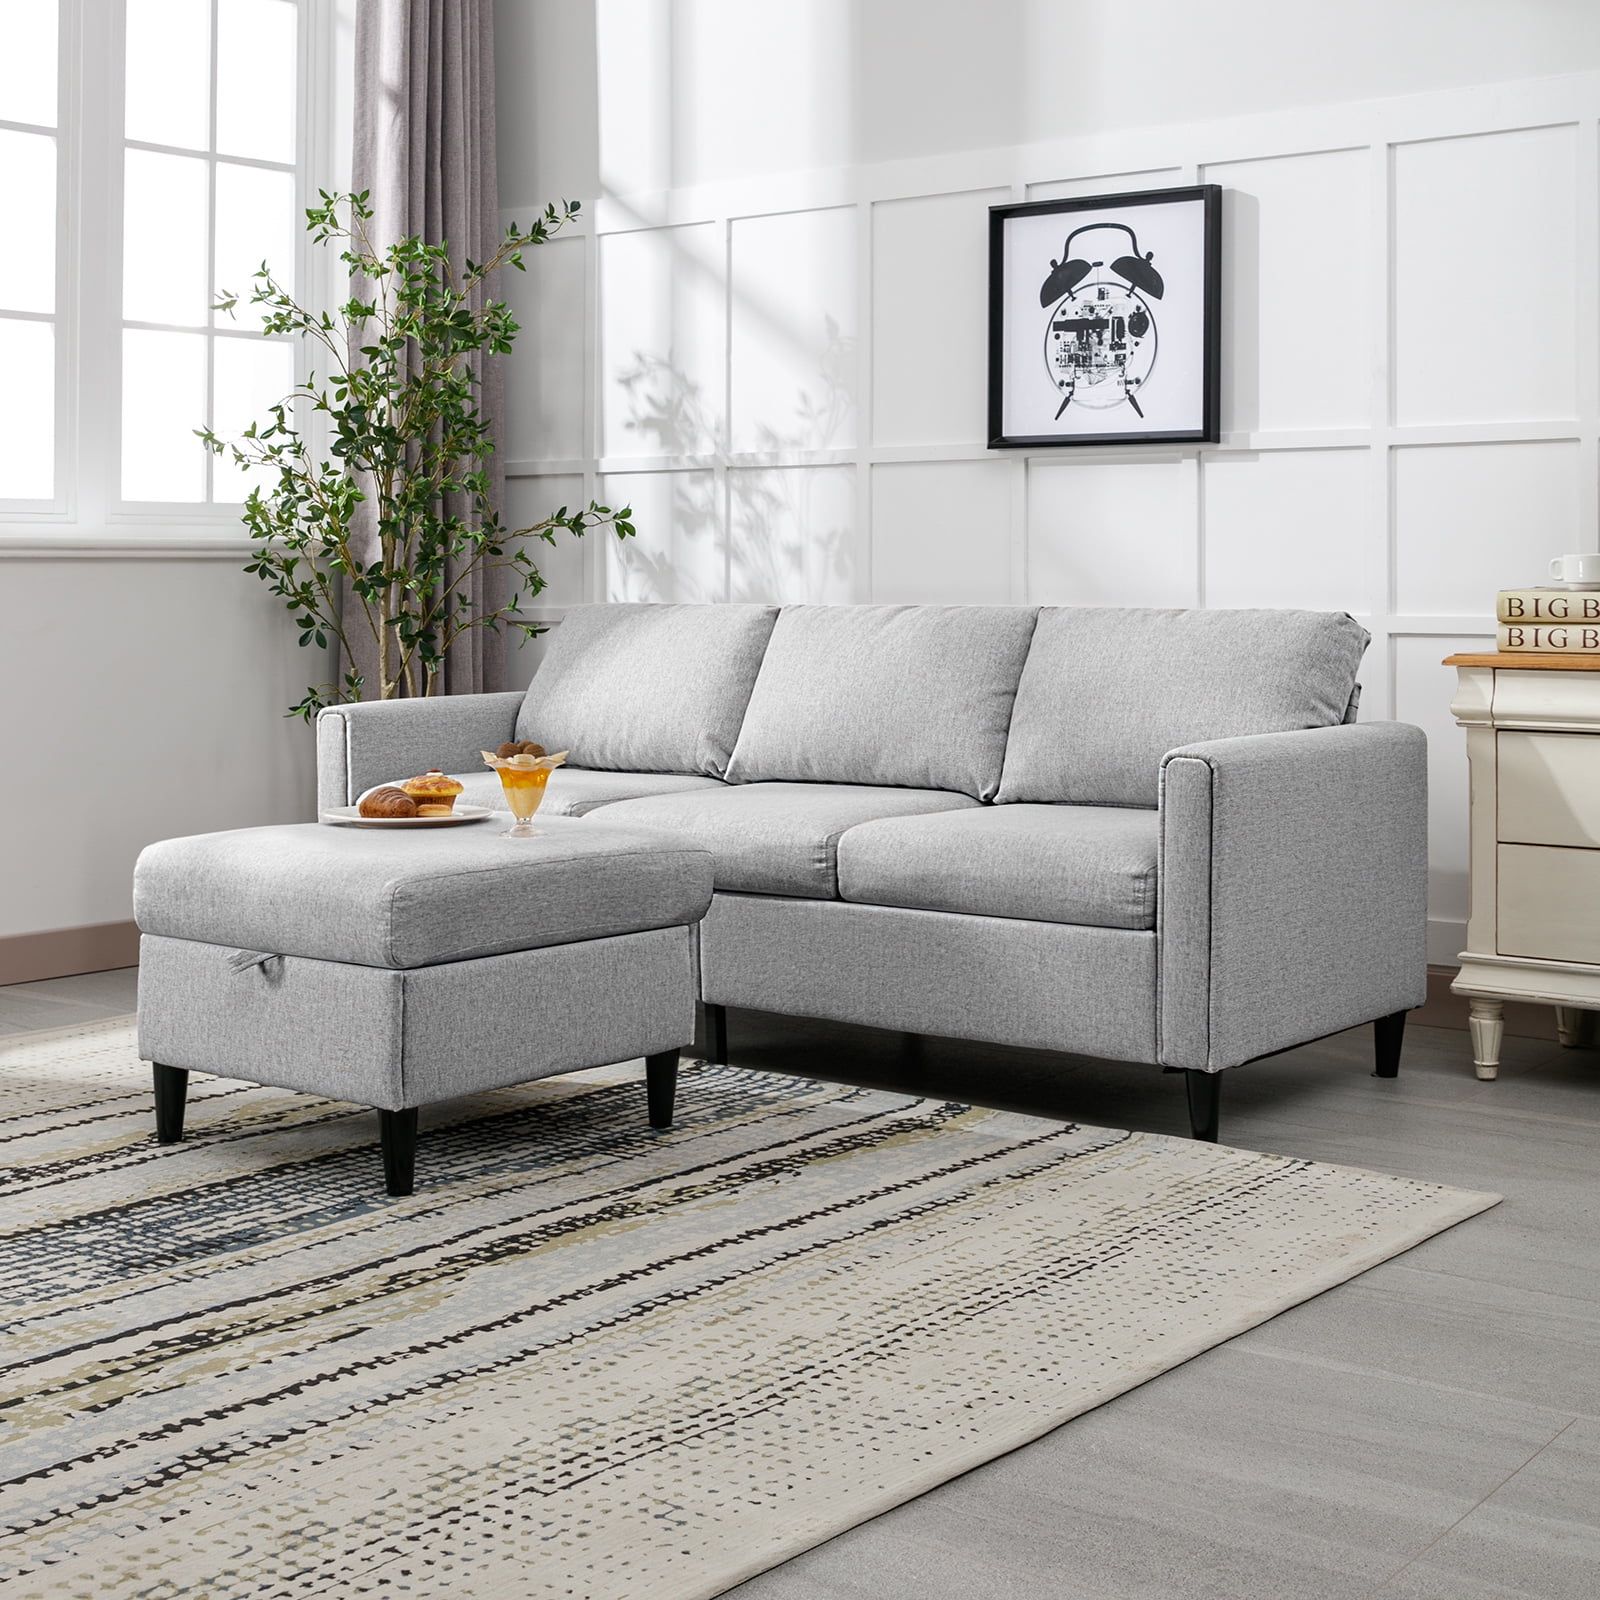 Zafly Sectional Sofa Couch, 3 Seat Sofa With Flexible Storage Ottoman,  Modern L Shape Linen Couches For Living Room/office – Light Grey –  Walmart Pertaining To Light Charcoal Linen Sofas (View 8 of 15)